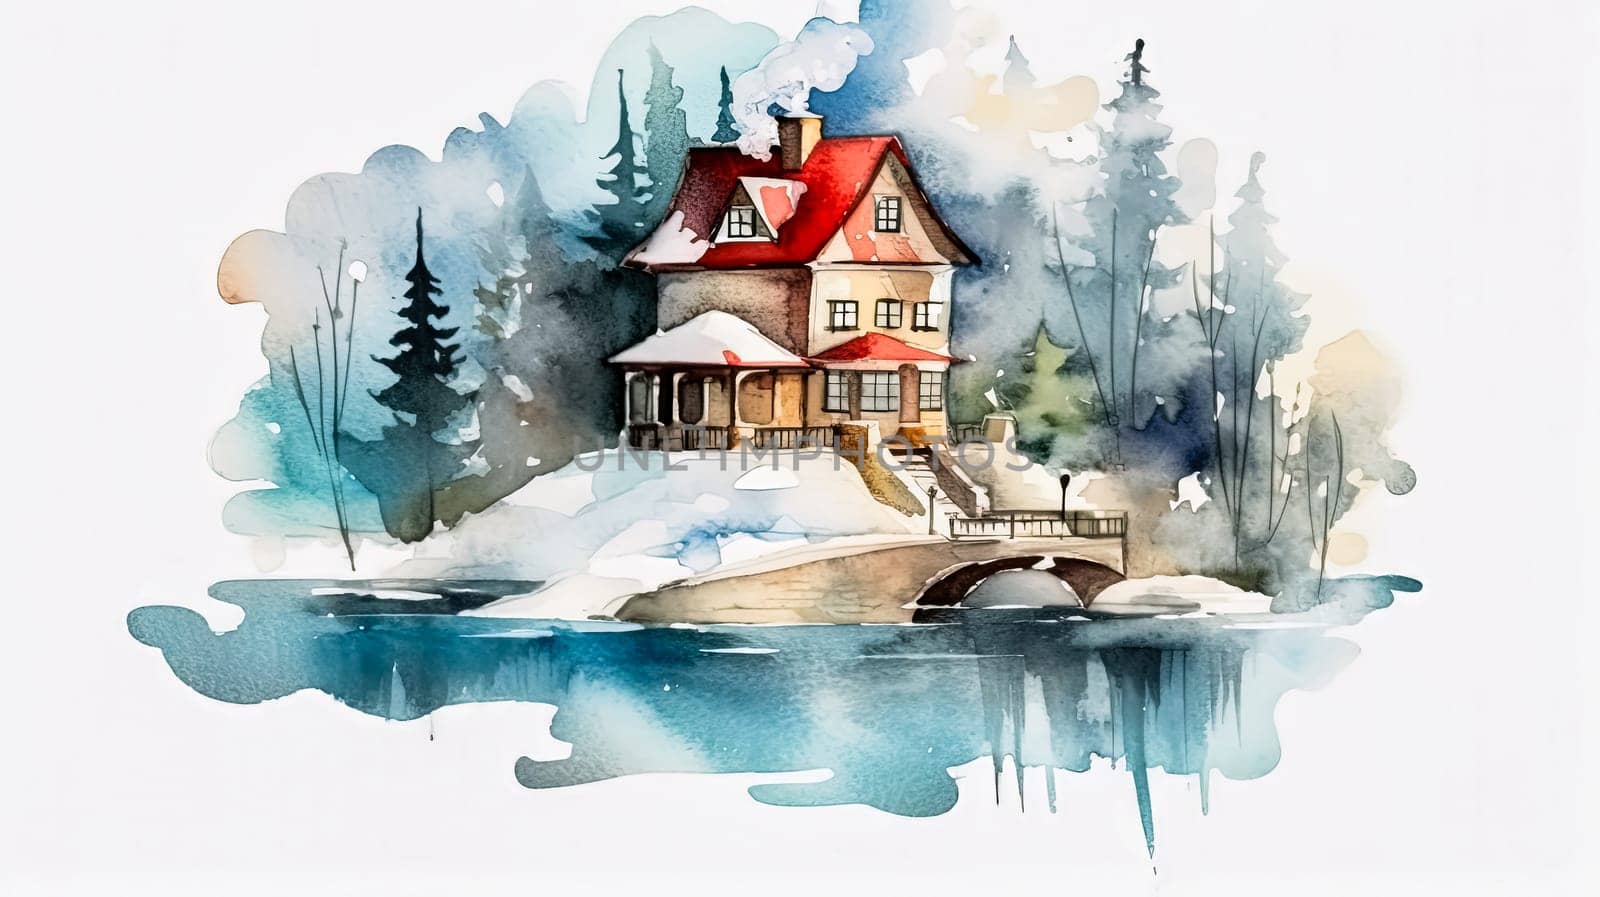 A cozy house nestled in a snowy forest, surrounded by Christmas trees a festive haven before the joyous holiday season